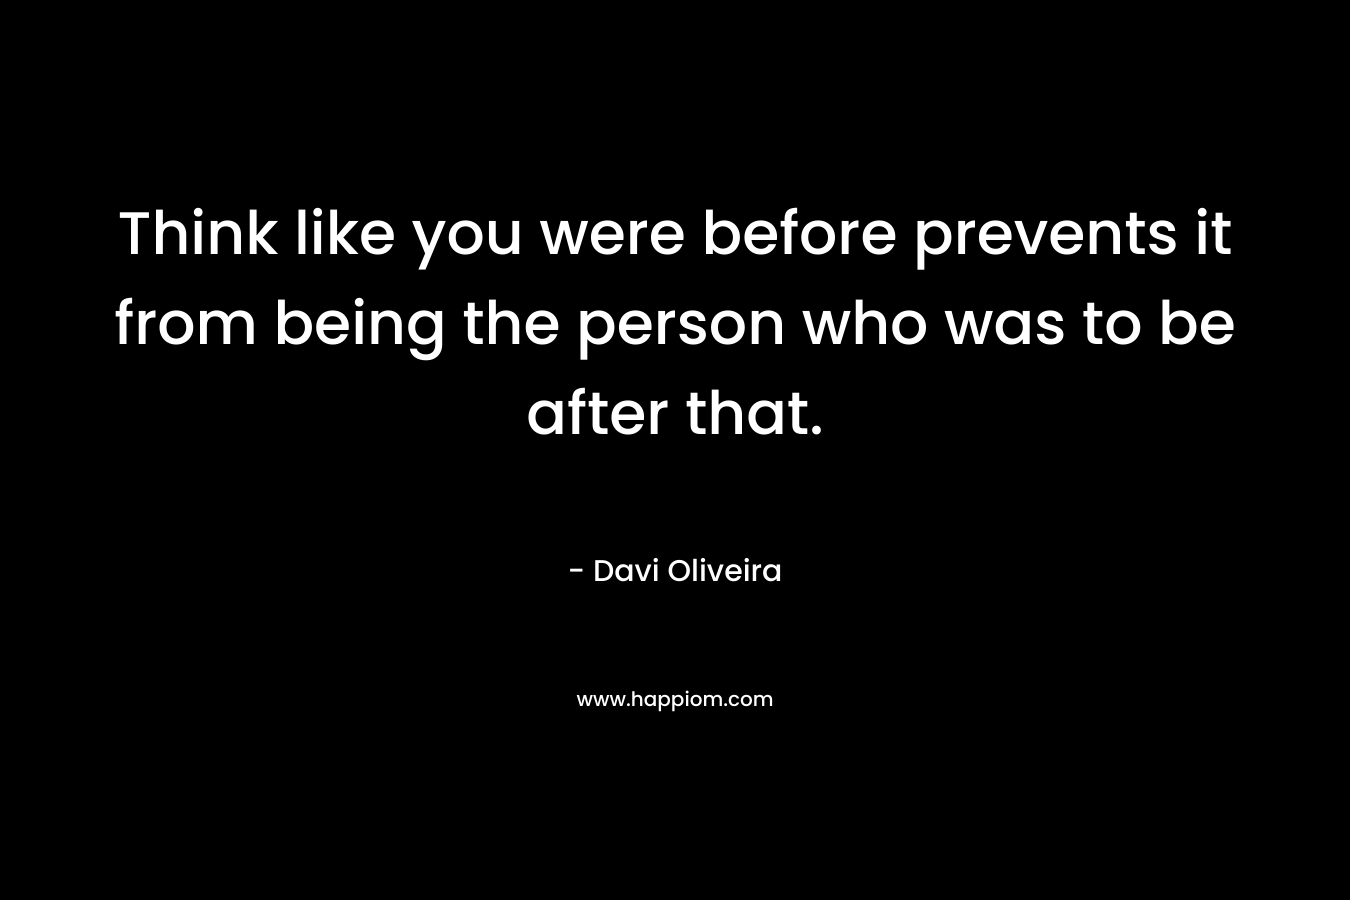 Think like you were before prevents it from being the person who was to be after that. – Davi Oliveira